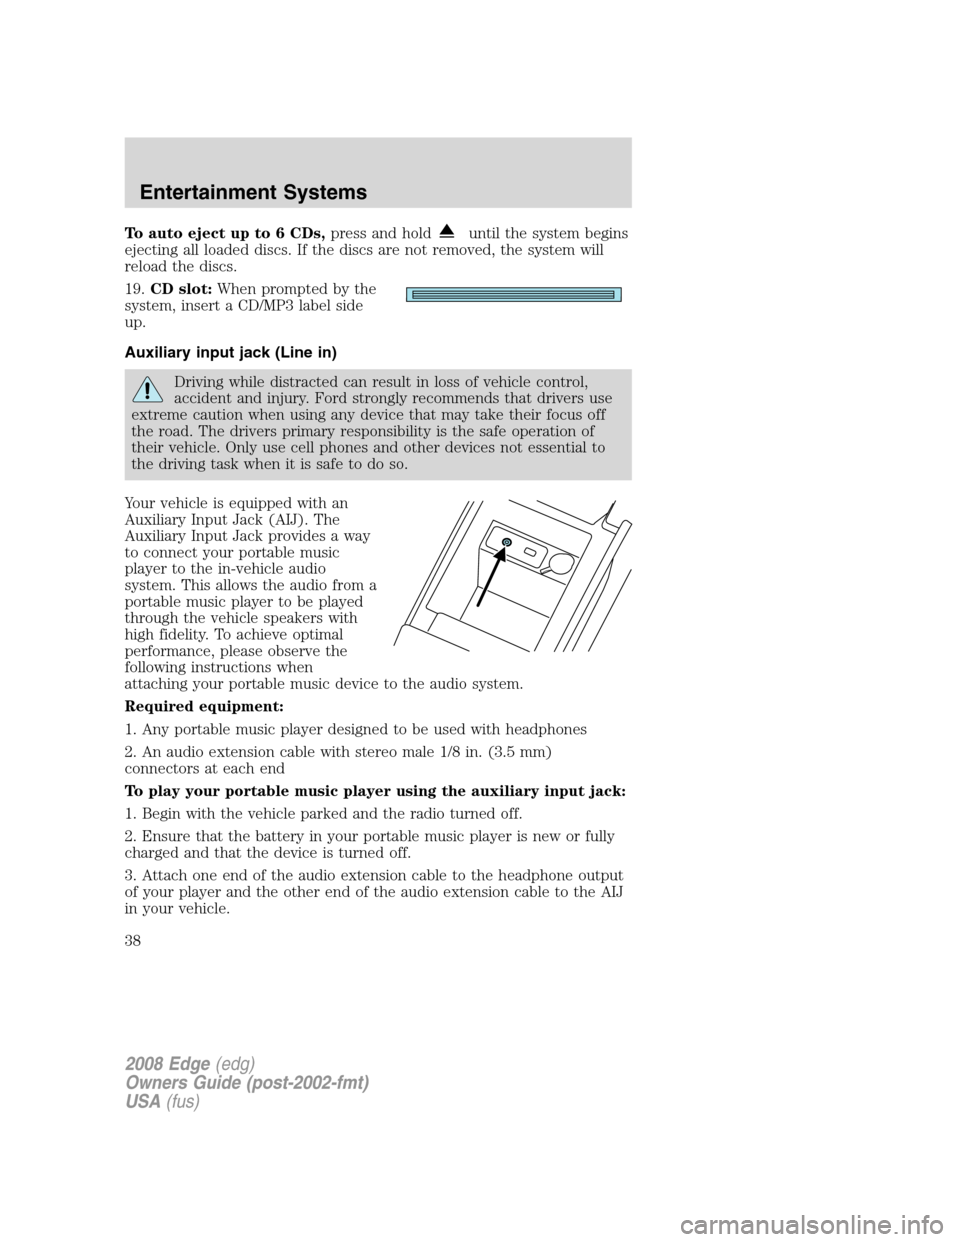 FORD EDGE 2008 1.G Owners Manual To auto eject up to 6 CDs,press and holduntil the system begins
ejecting all loaded discs. If the discs are not removed, the system will
reload the discs.
19.CD slot:When prompted by the
system, inser